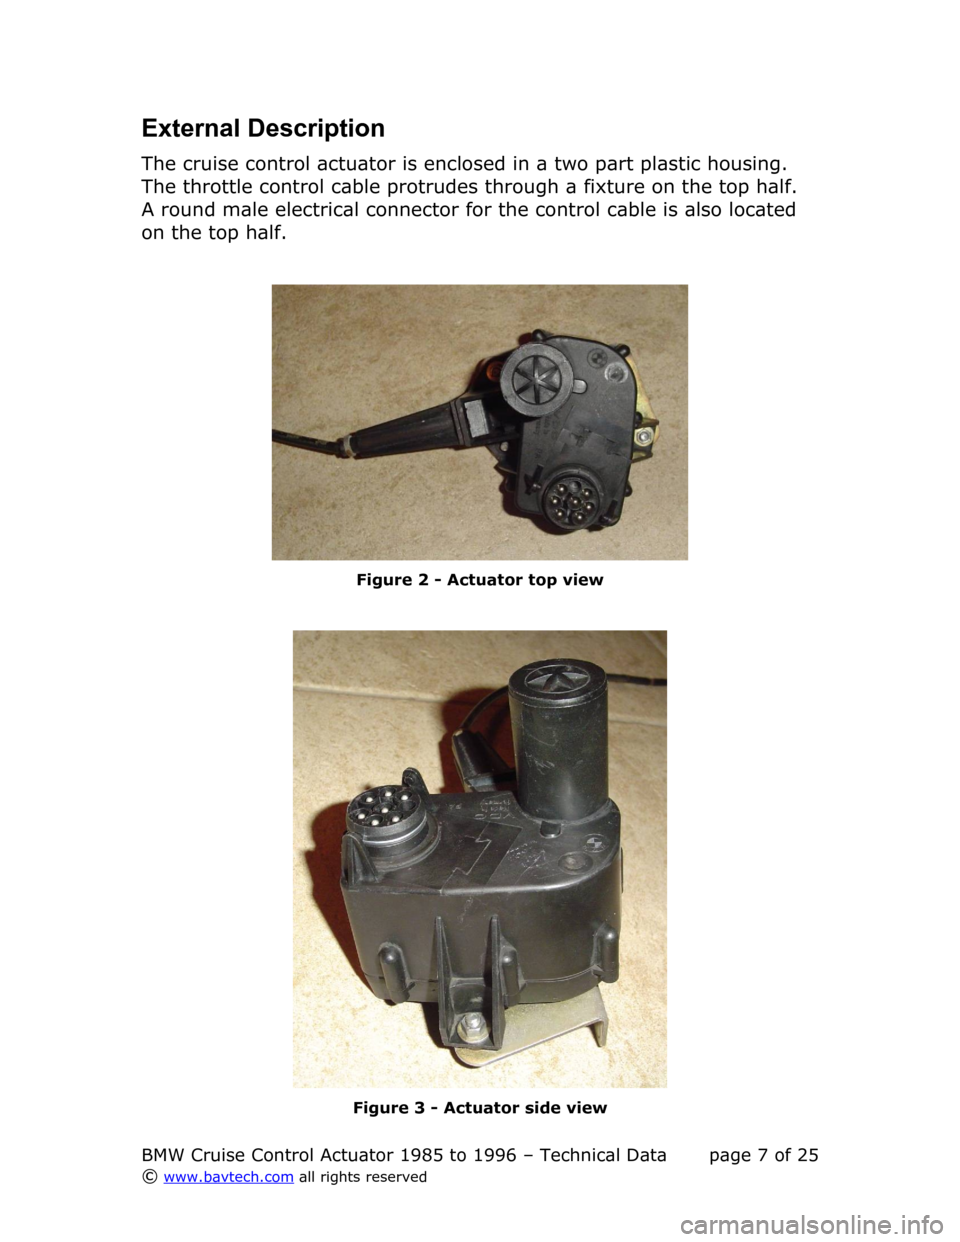 BMW 5 SERIES 1996 E34 Cruise Control Acutator External Description
The cruise control actuator is enclosed in a two part plastic housing.  
The throttle control cable protrudes through a fixture on the top half.  
A round male electrical connecto